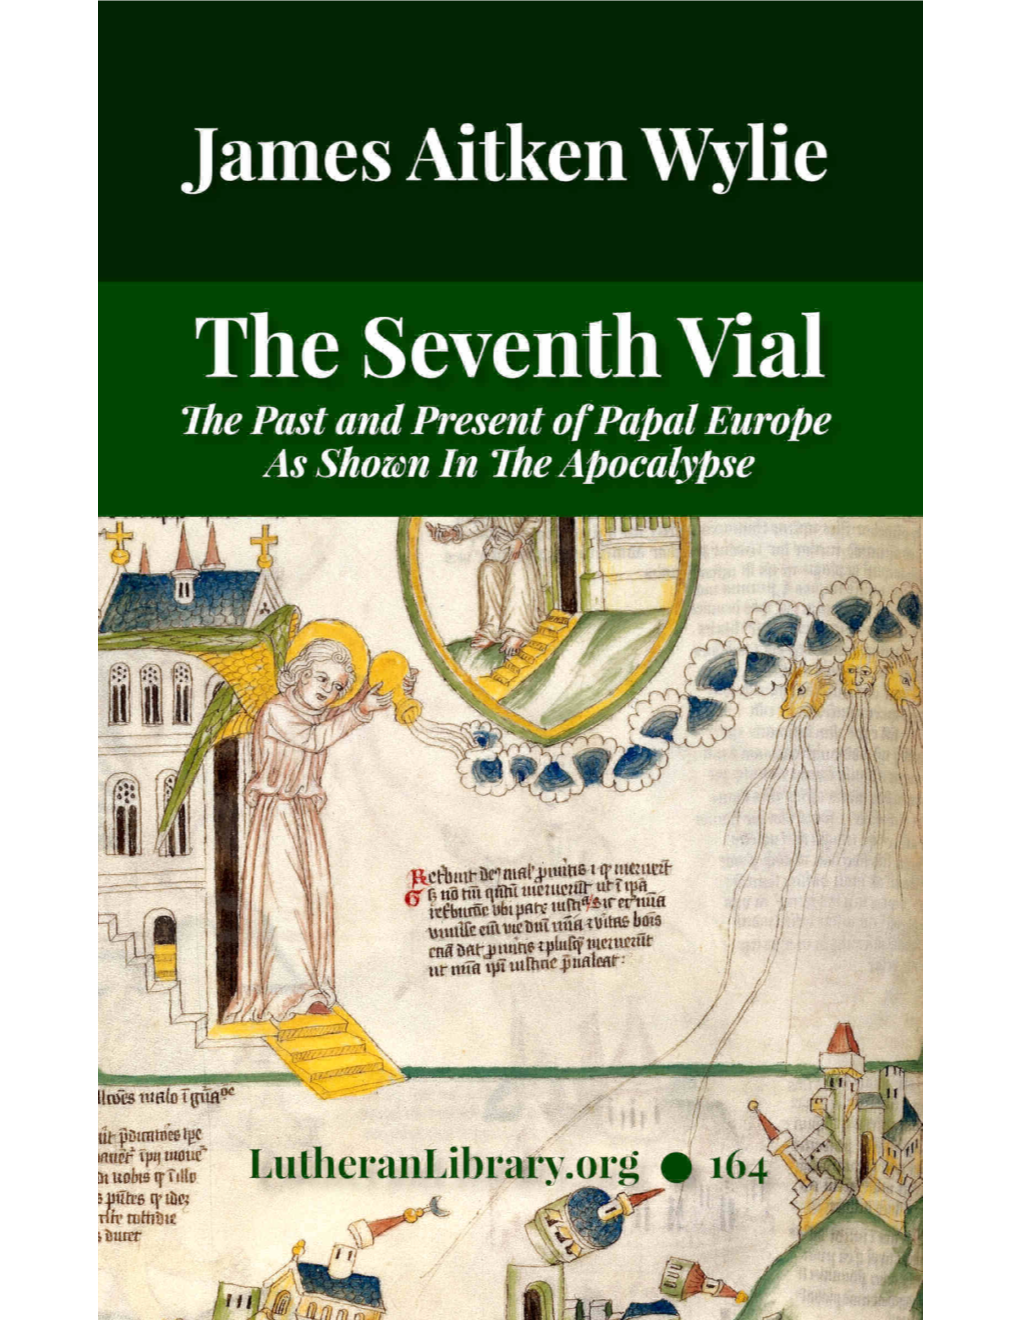 The Seventh Vial: the Past and Present of Papal Europe As Shown